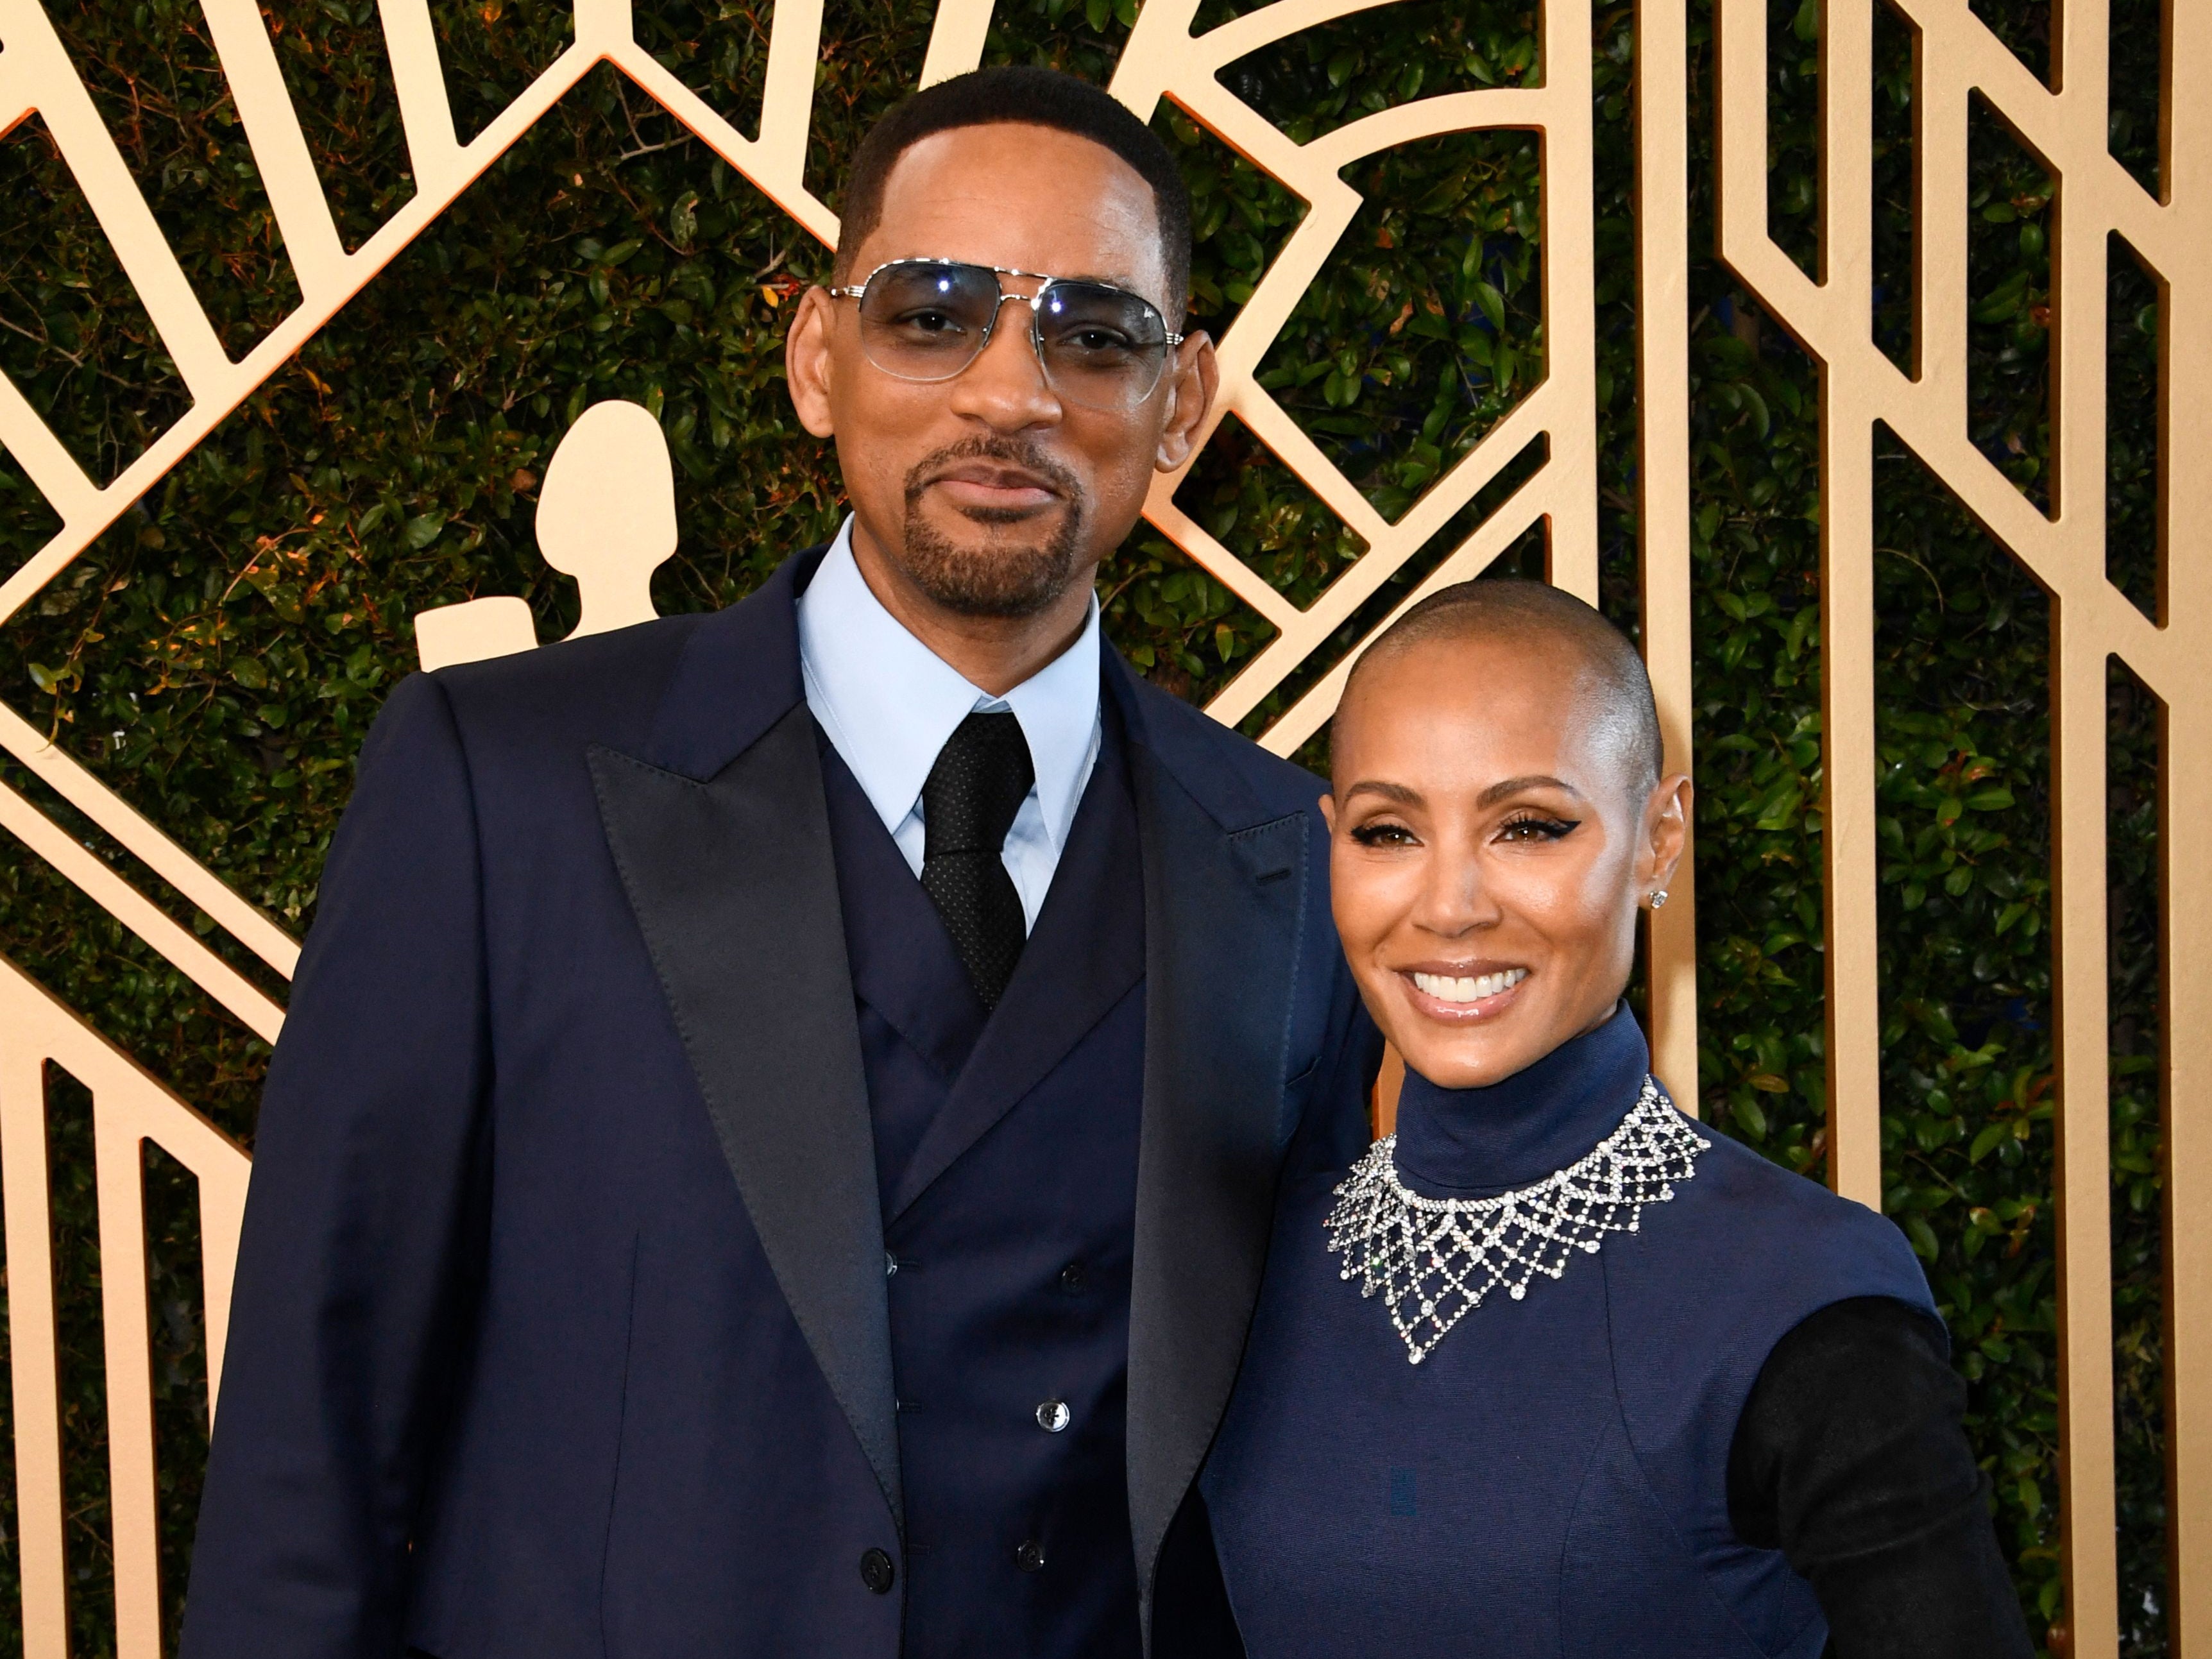 Will Smith and Jada Pinkett Smith wore matching outfits at the 2022 SAG Awards